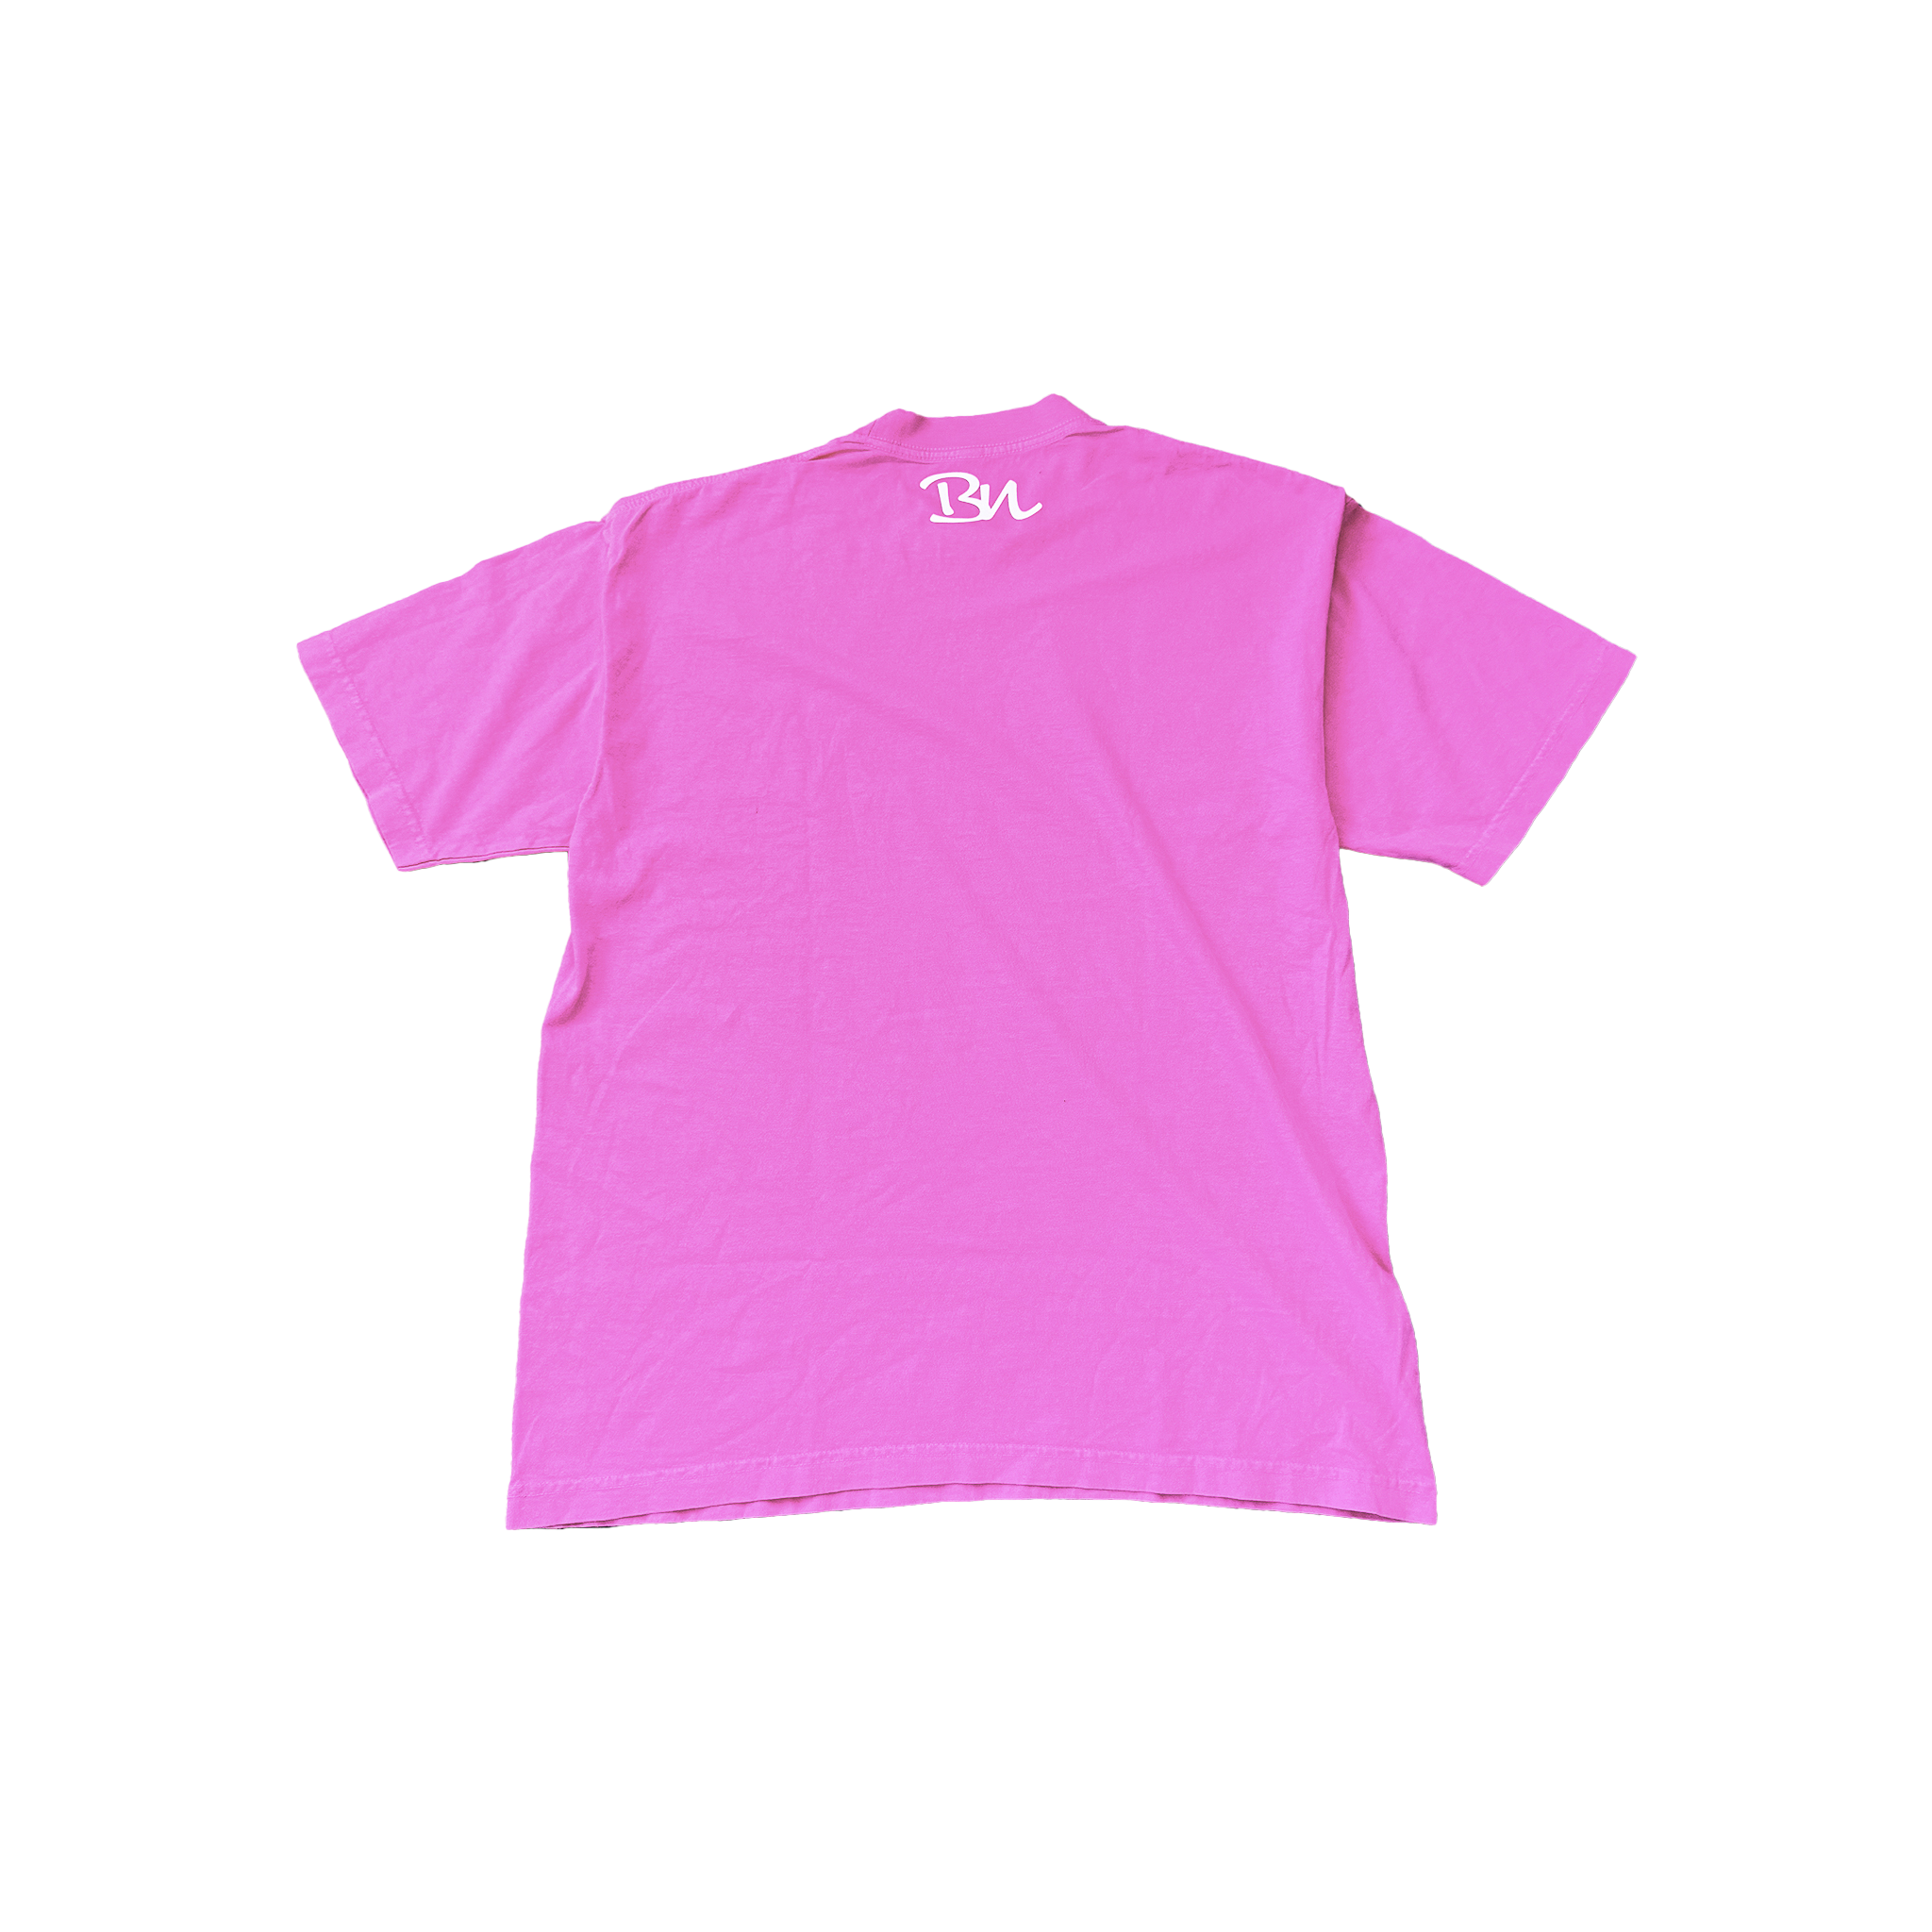 A pink unisex Off-Centered Tee by Better not with a monogram "bm" embroidered in white on the upper back, displayed against a white background.